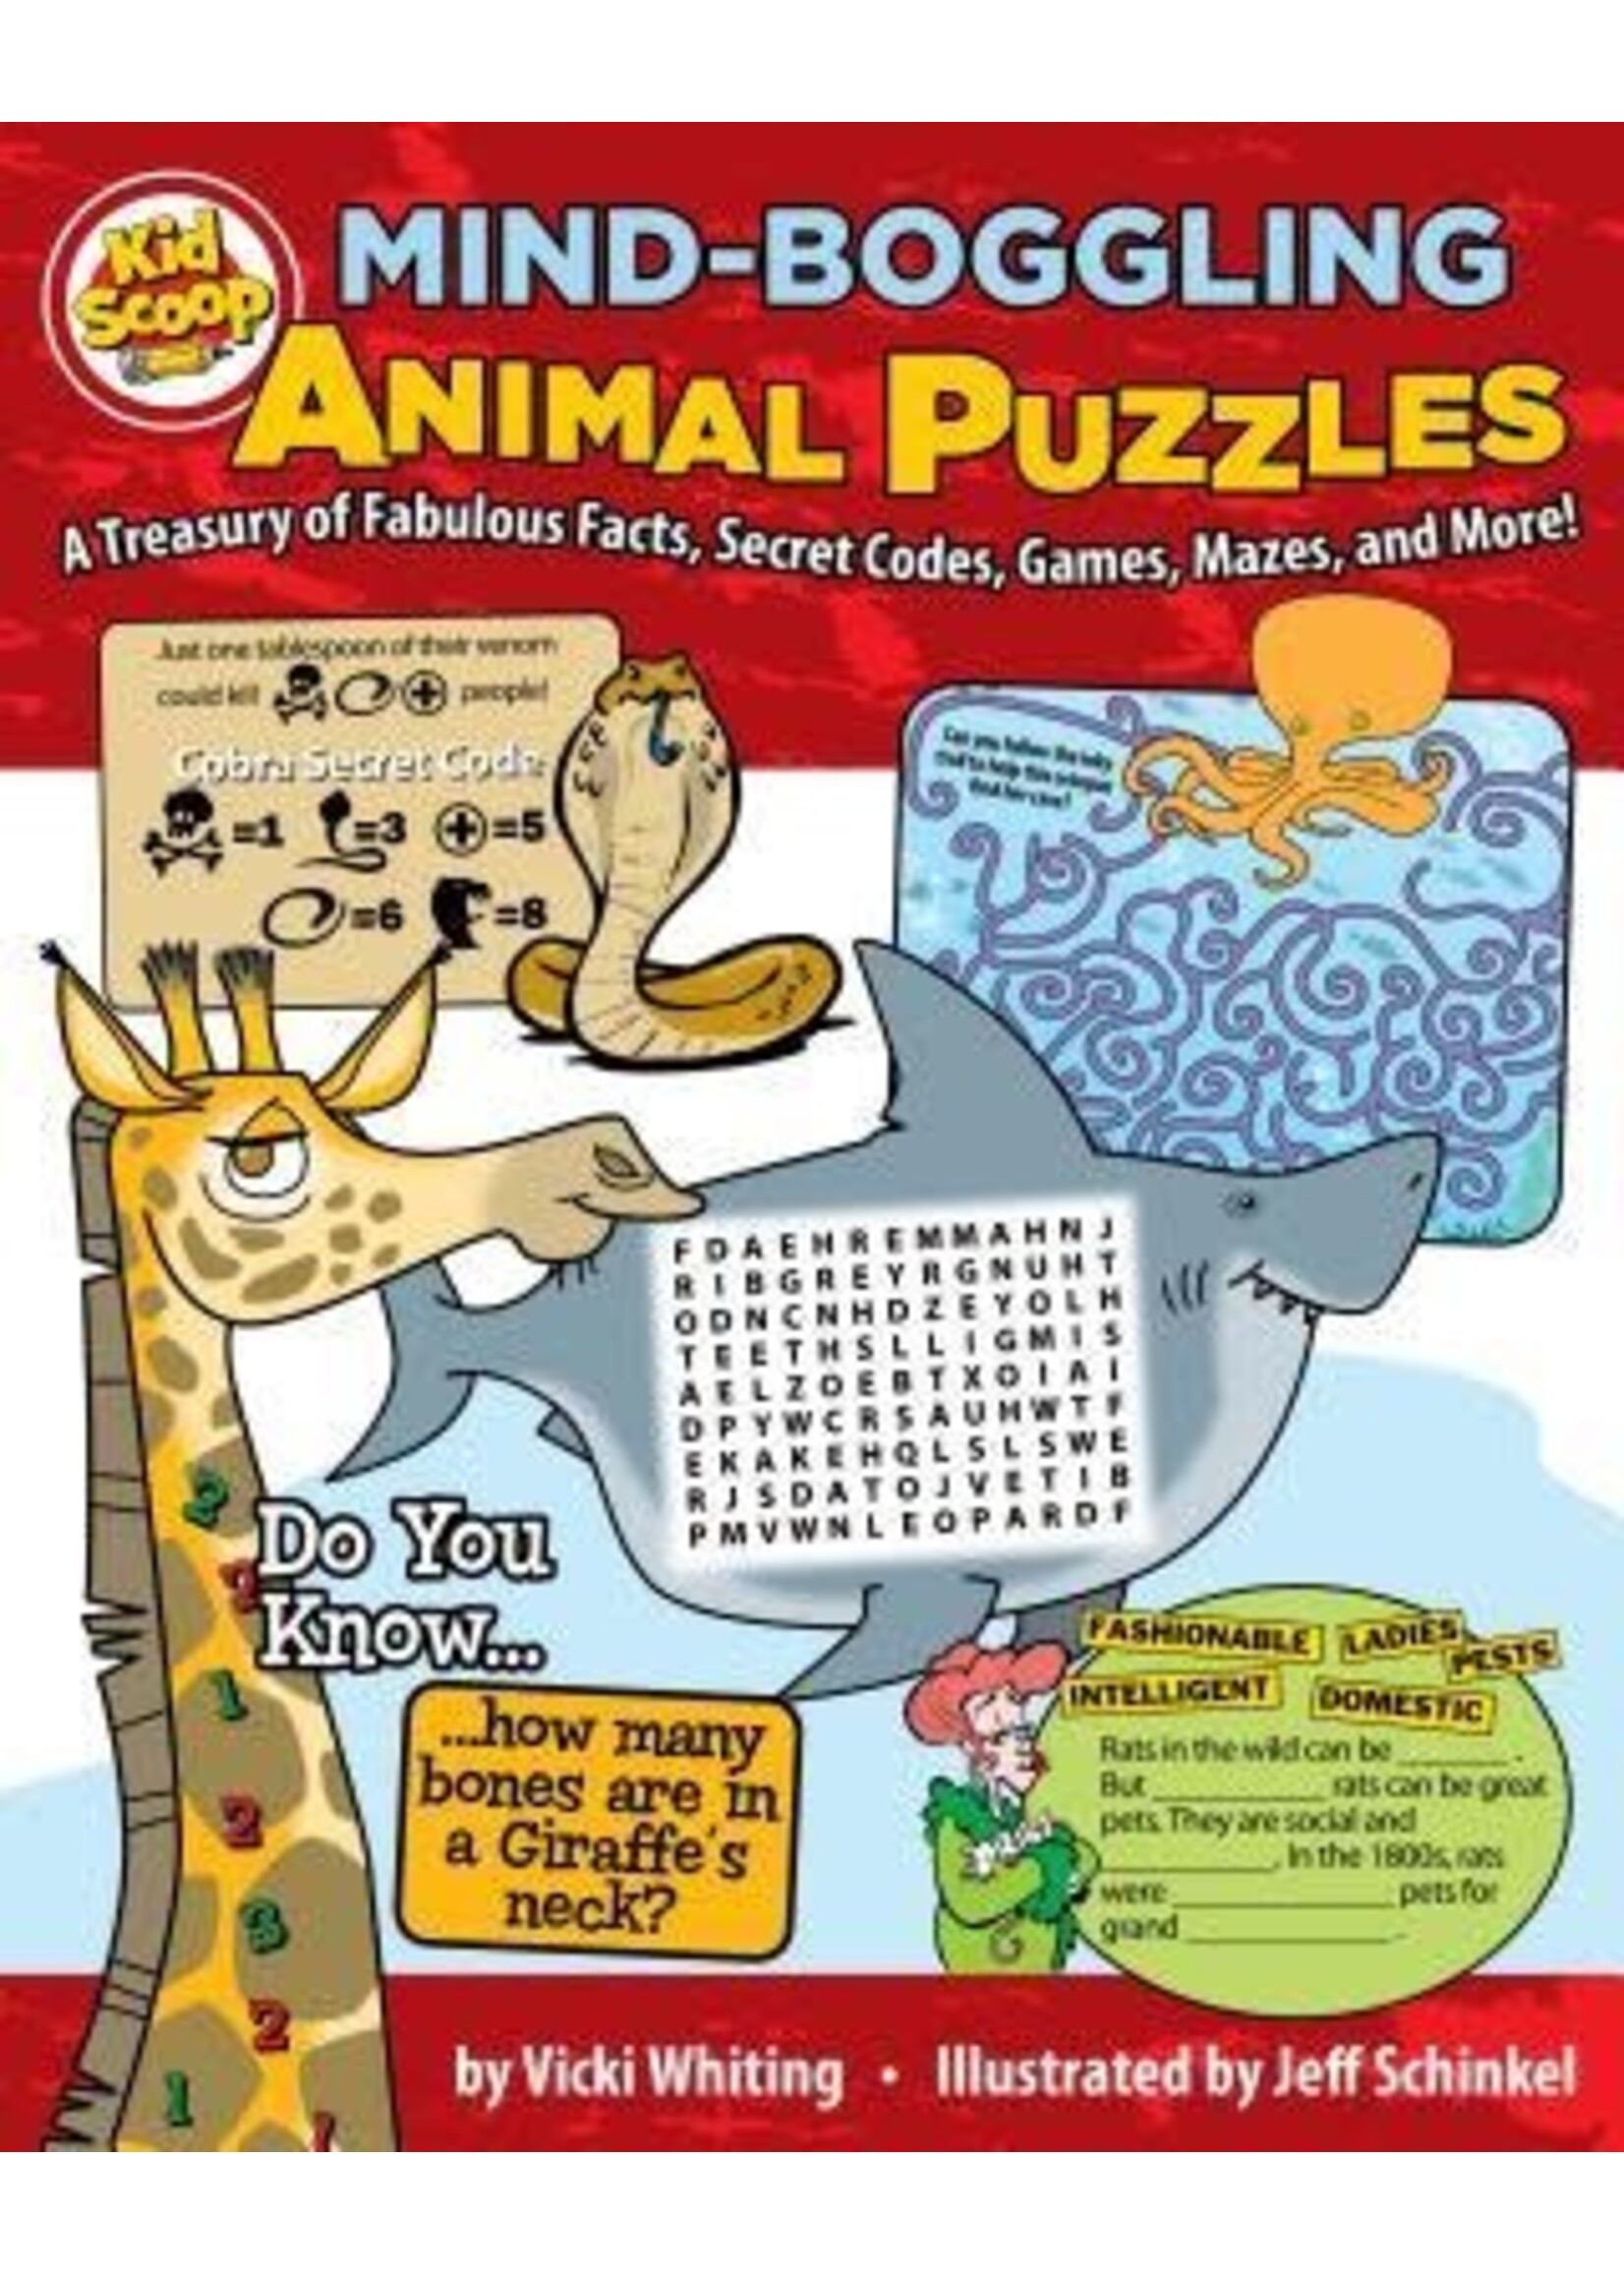 Mind-Boggling Animal Puzzles by Vicki Whiting, Jeff Schinkel